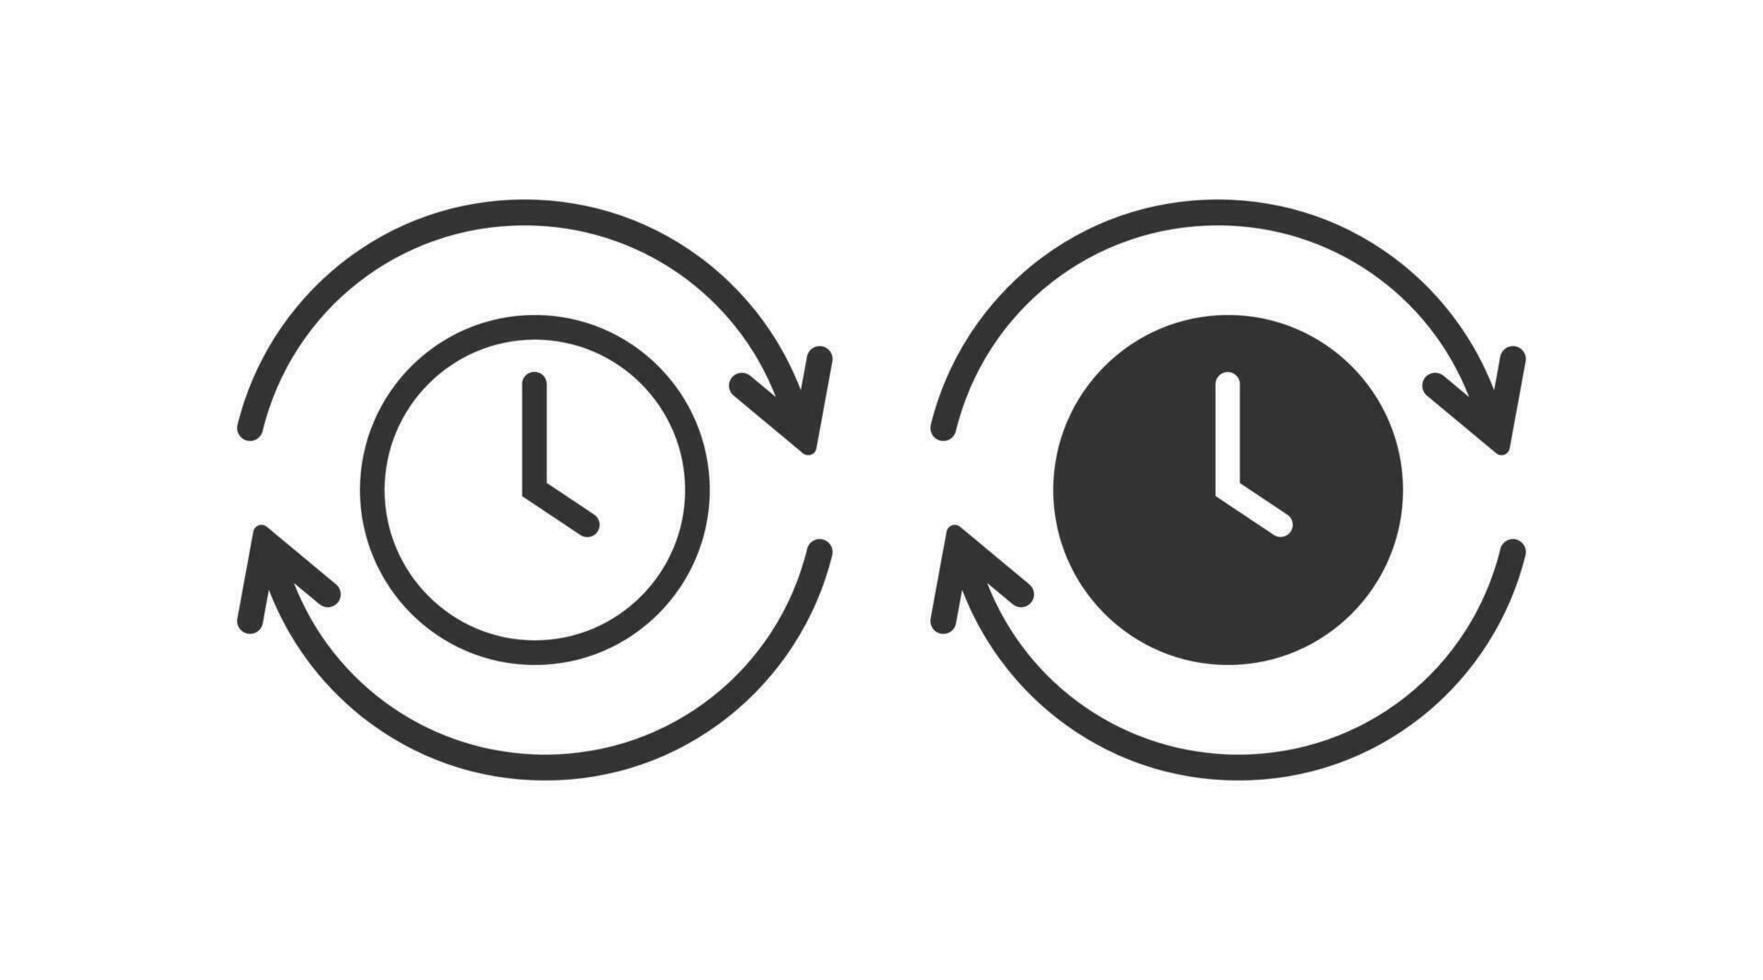 Back time o'clock icon. Refresh time symbol. Sign app button vector flat.